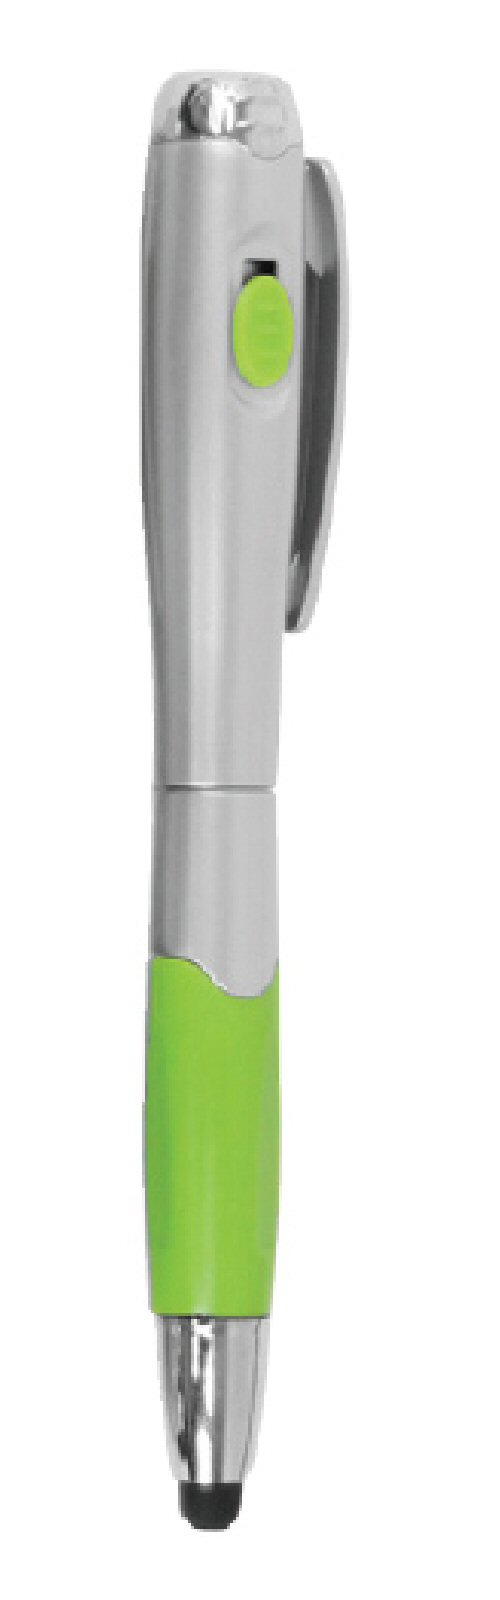 3-Way Tablet Stylus, GREEN Pen & LED Light for iPad, Android - Click Image to Close